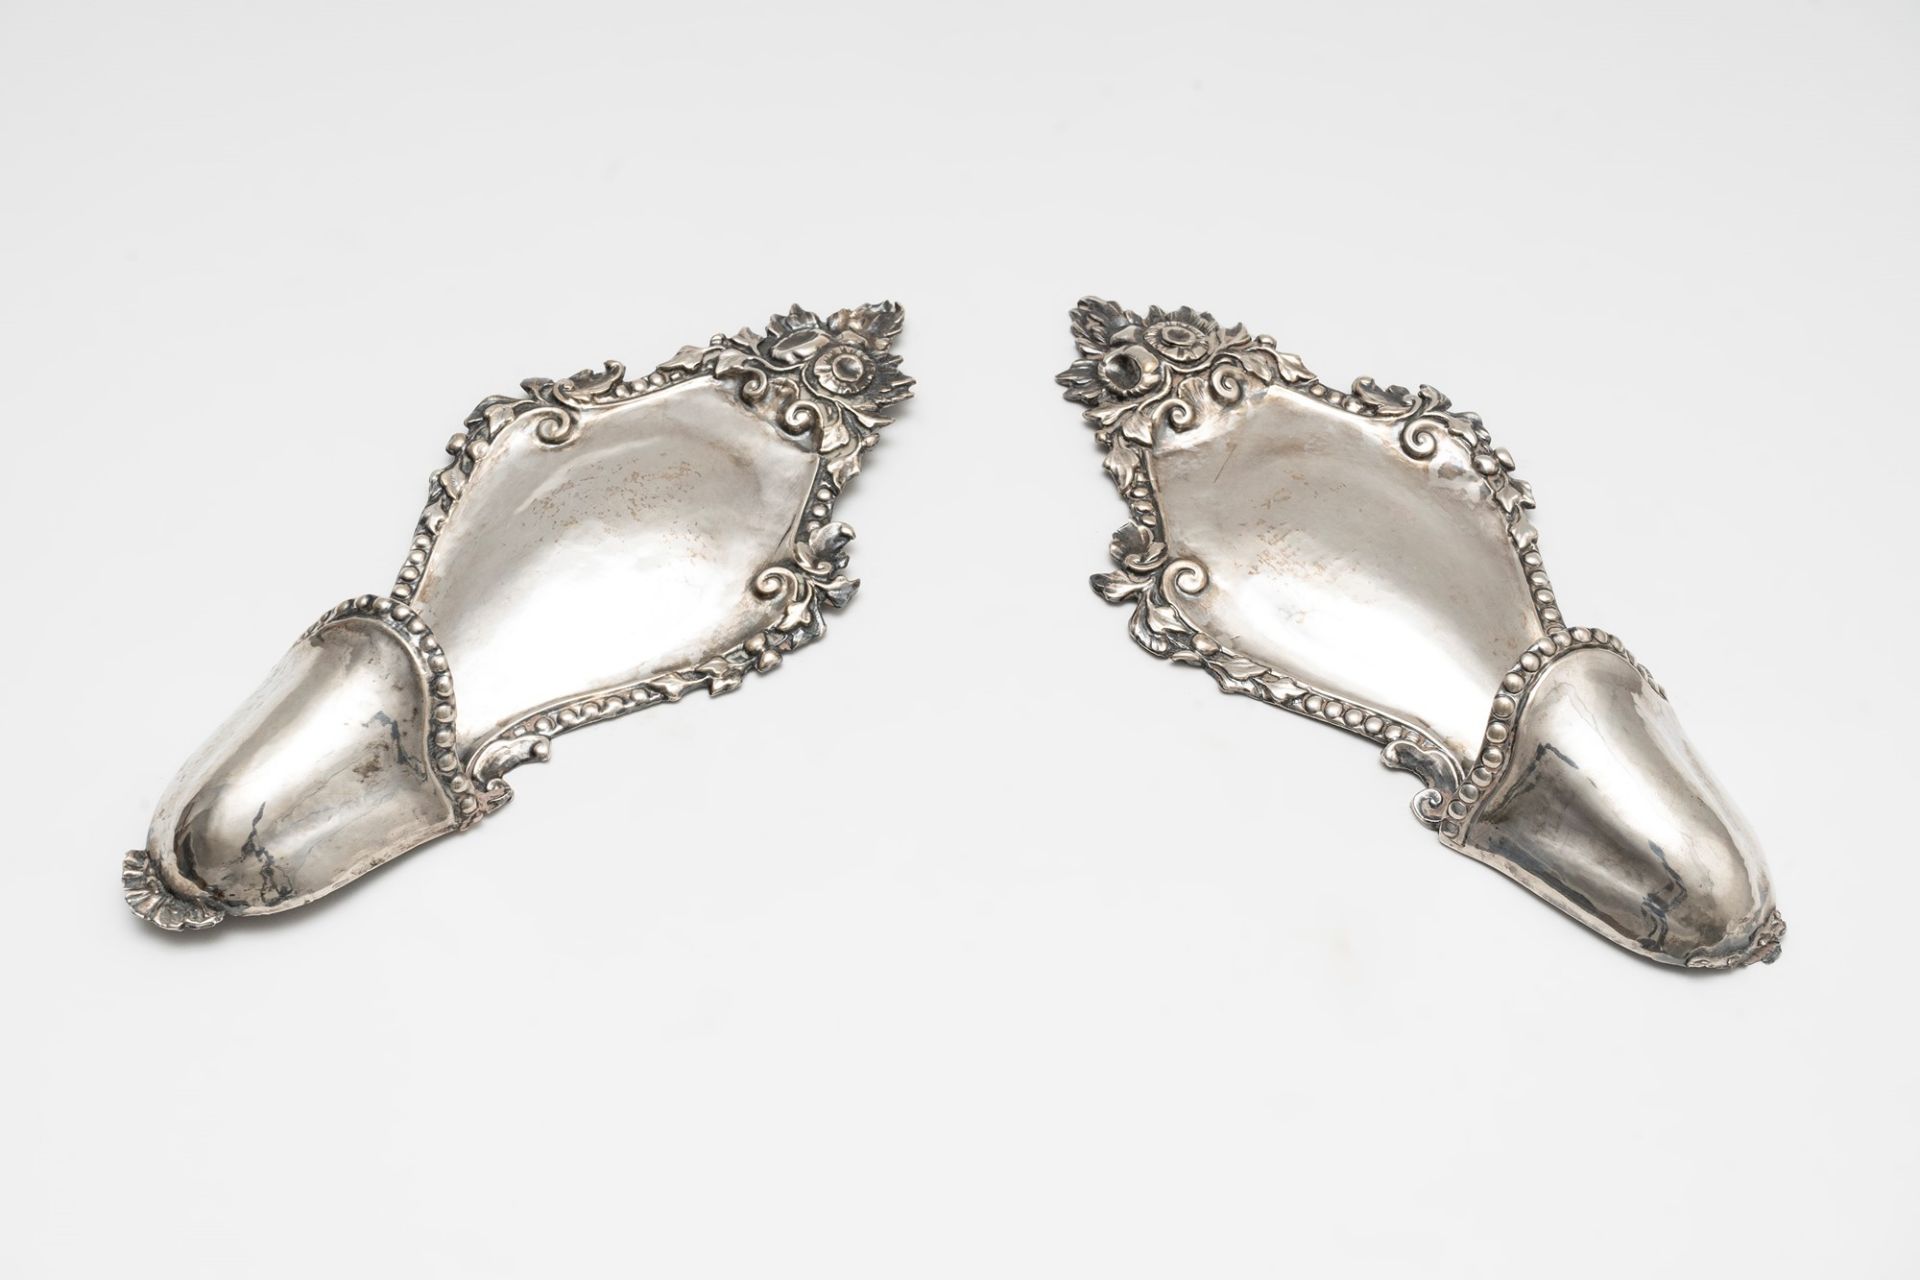 Two silver flower holders, 19th century